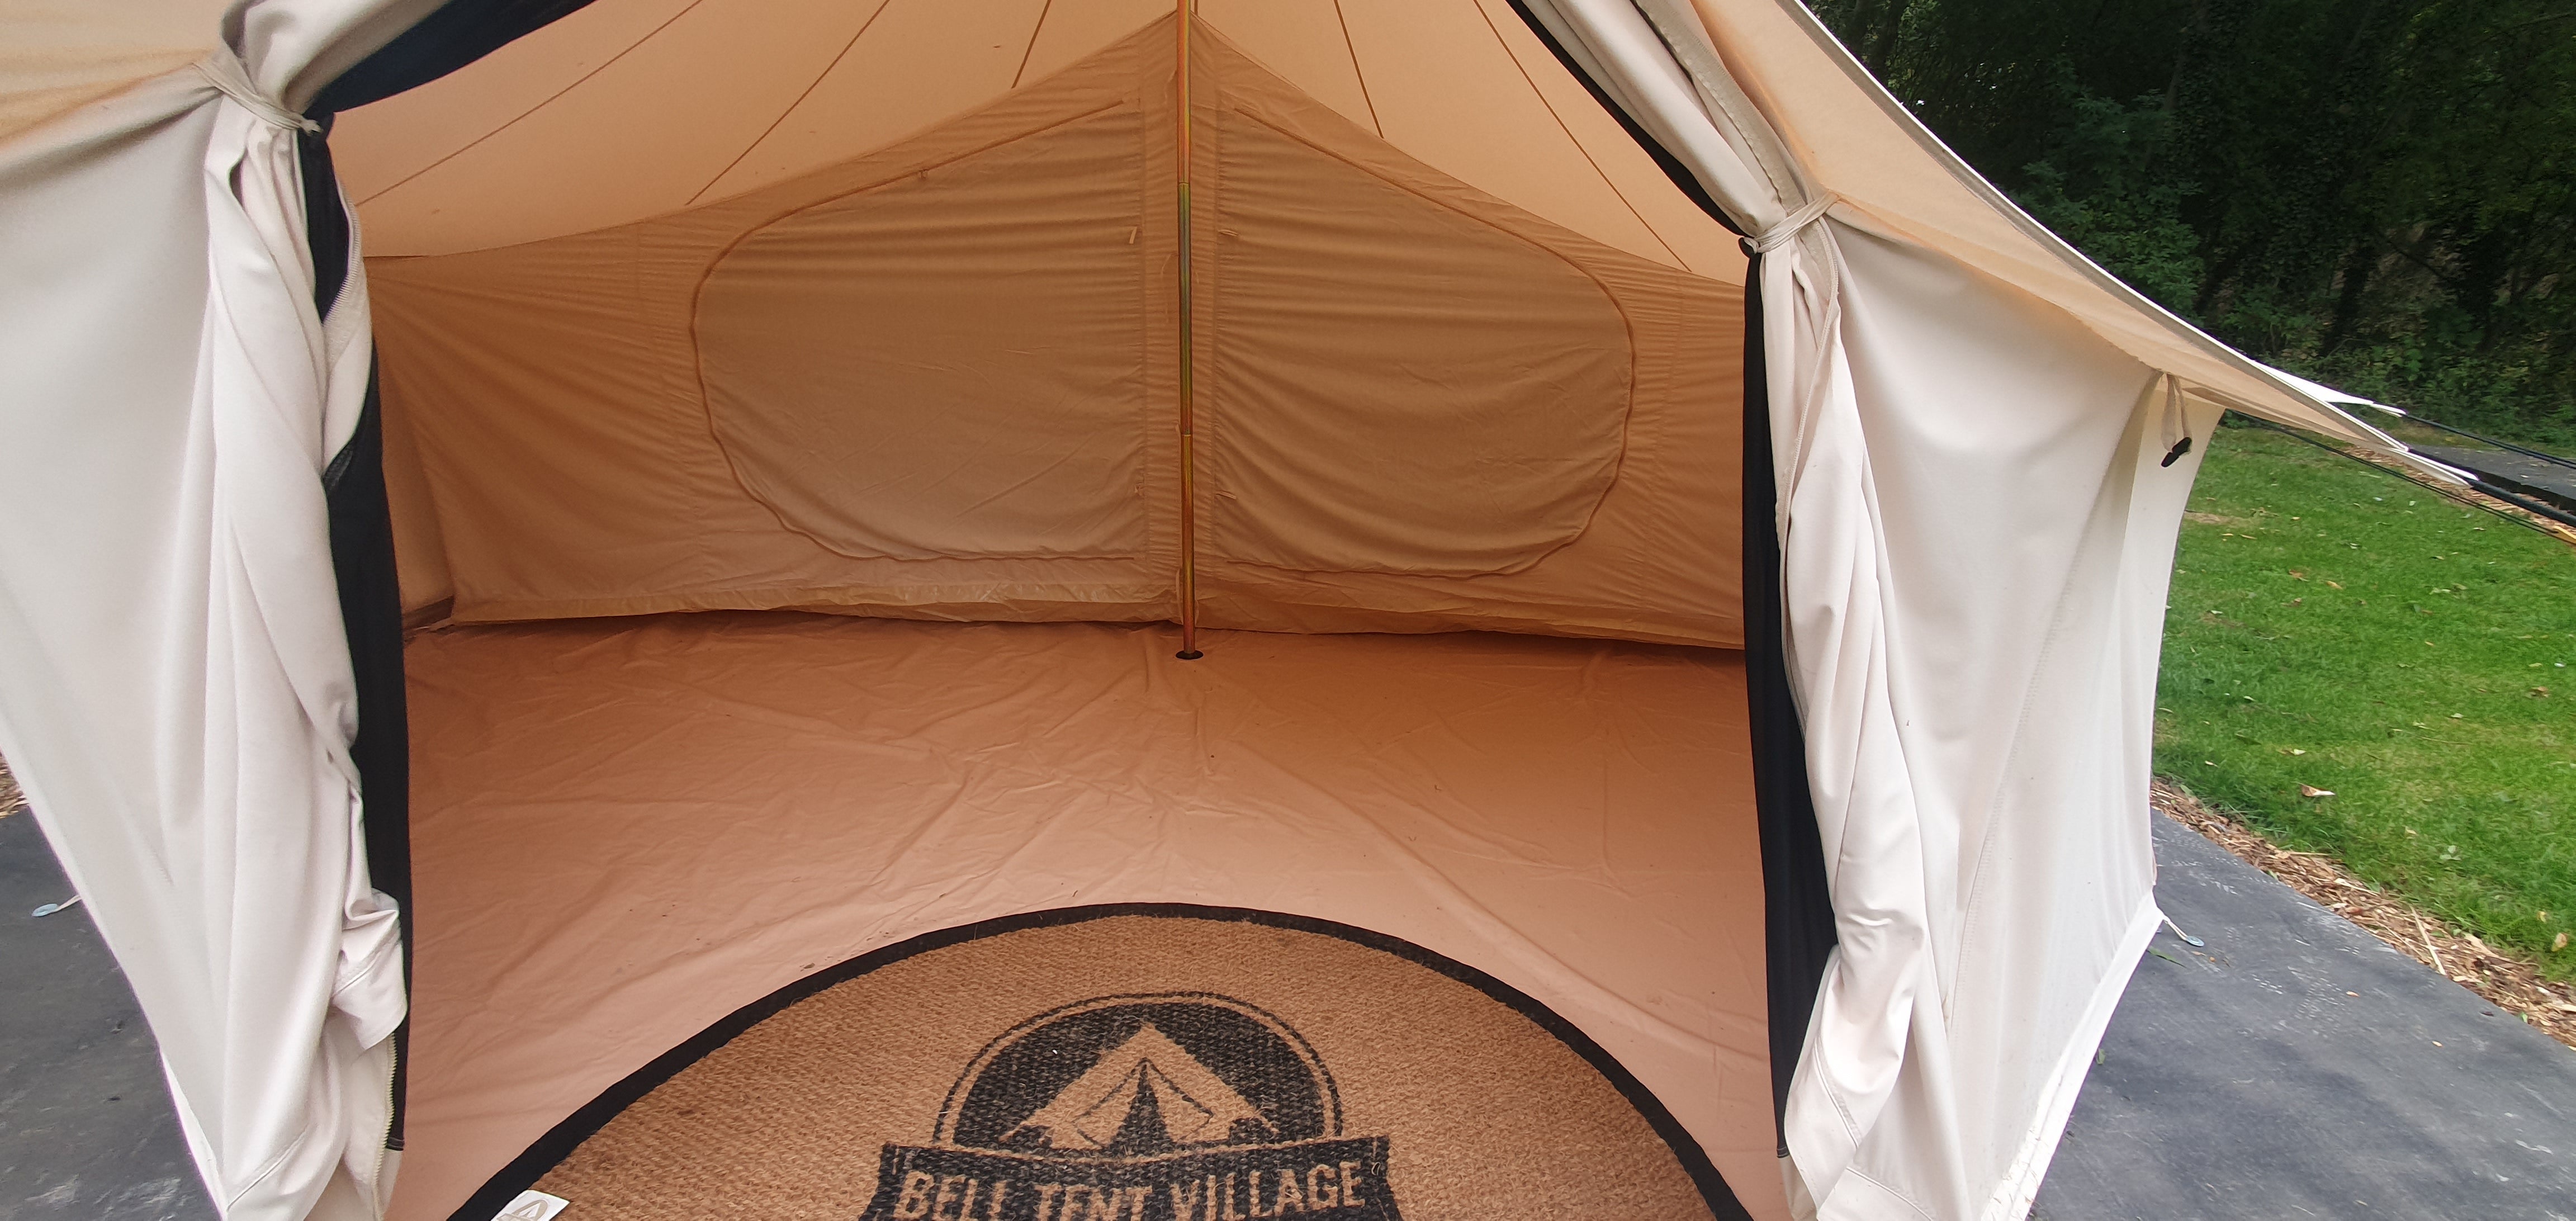 BTV 4 - 7m XL (1.2m High Walls) Water Resistant & Fire Retardant Cotton Canvas Bell Tent With Stove Hole (Double Door)